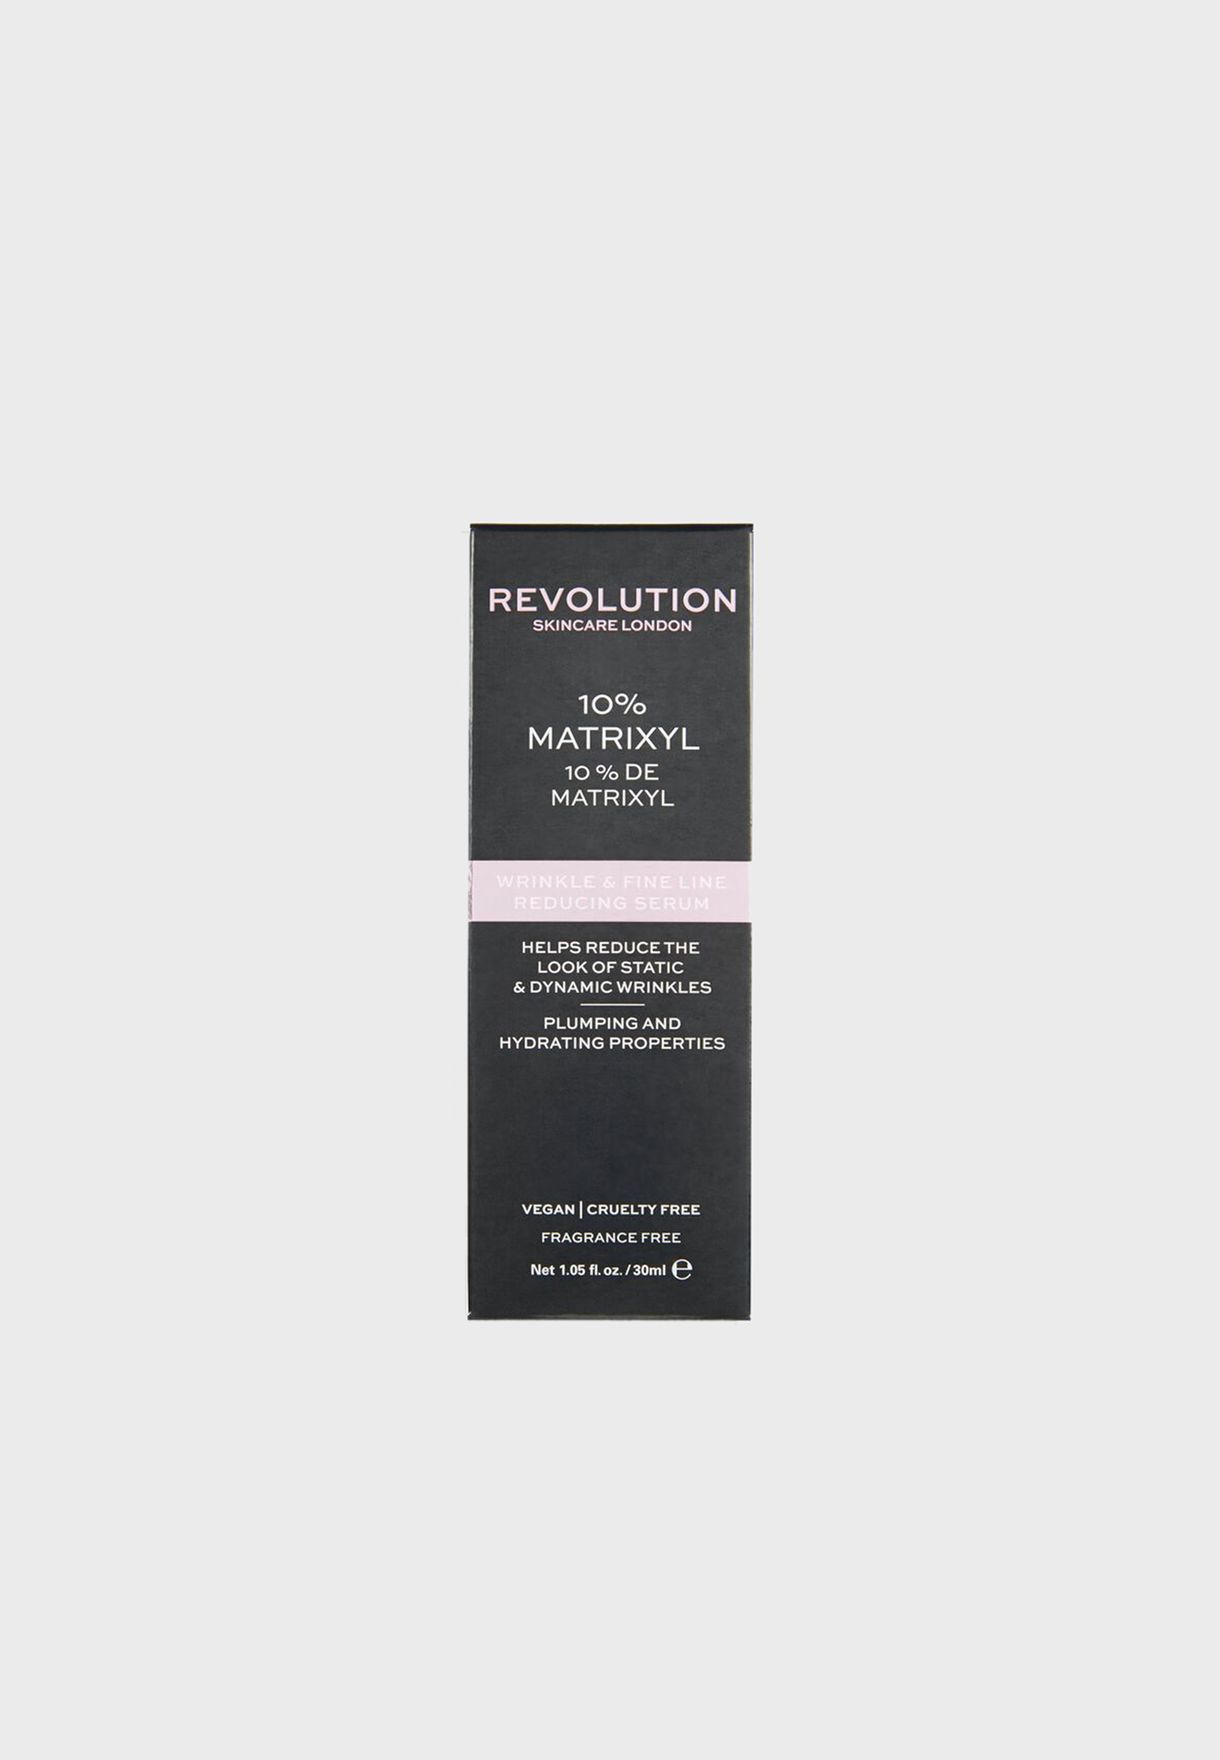 Wrinkle And Fine Line Reducing Serum - 10% Matrixyl